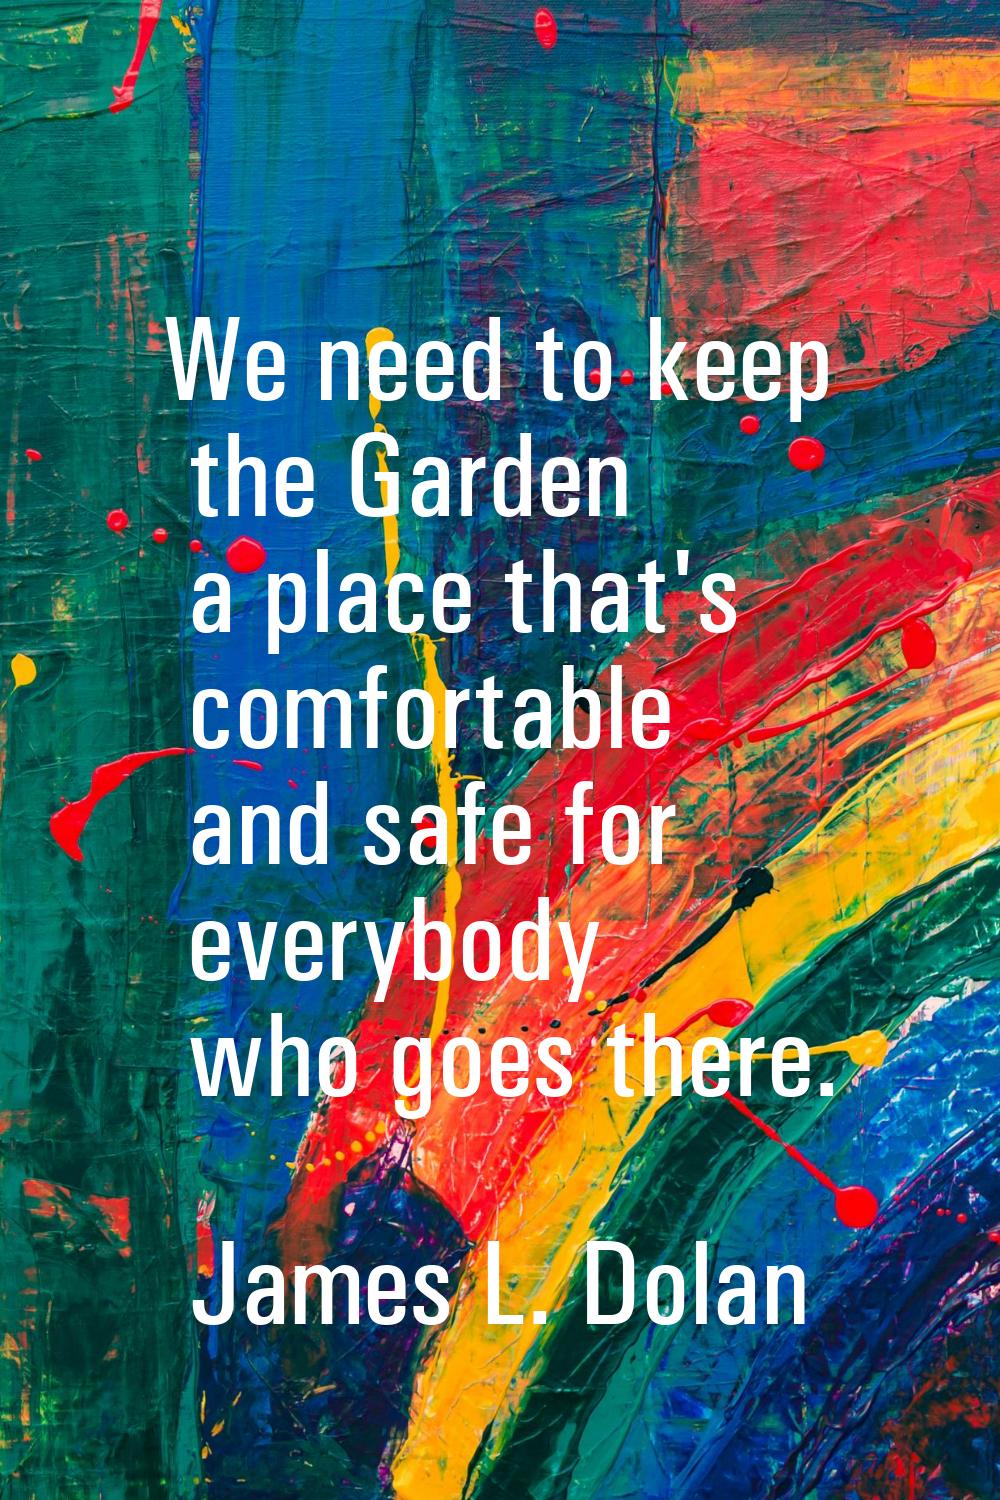 We need to keep the Garden a place that's comfortable and safe for everybody who goes there.